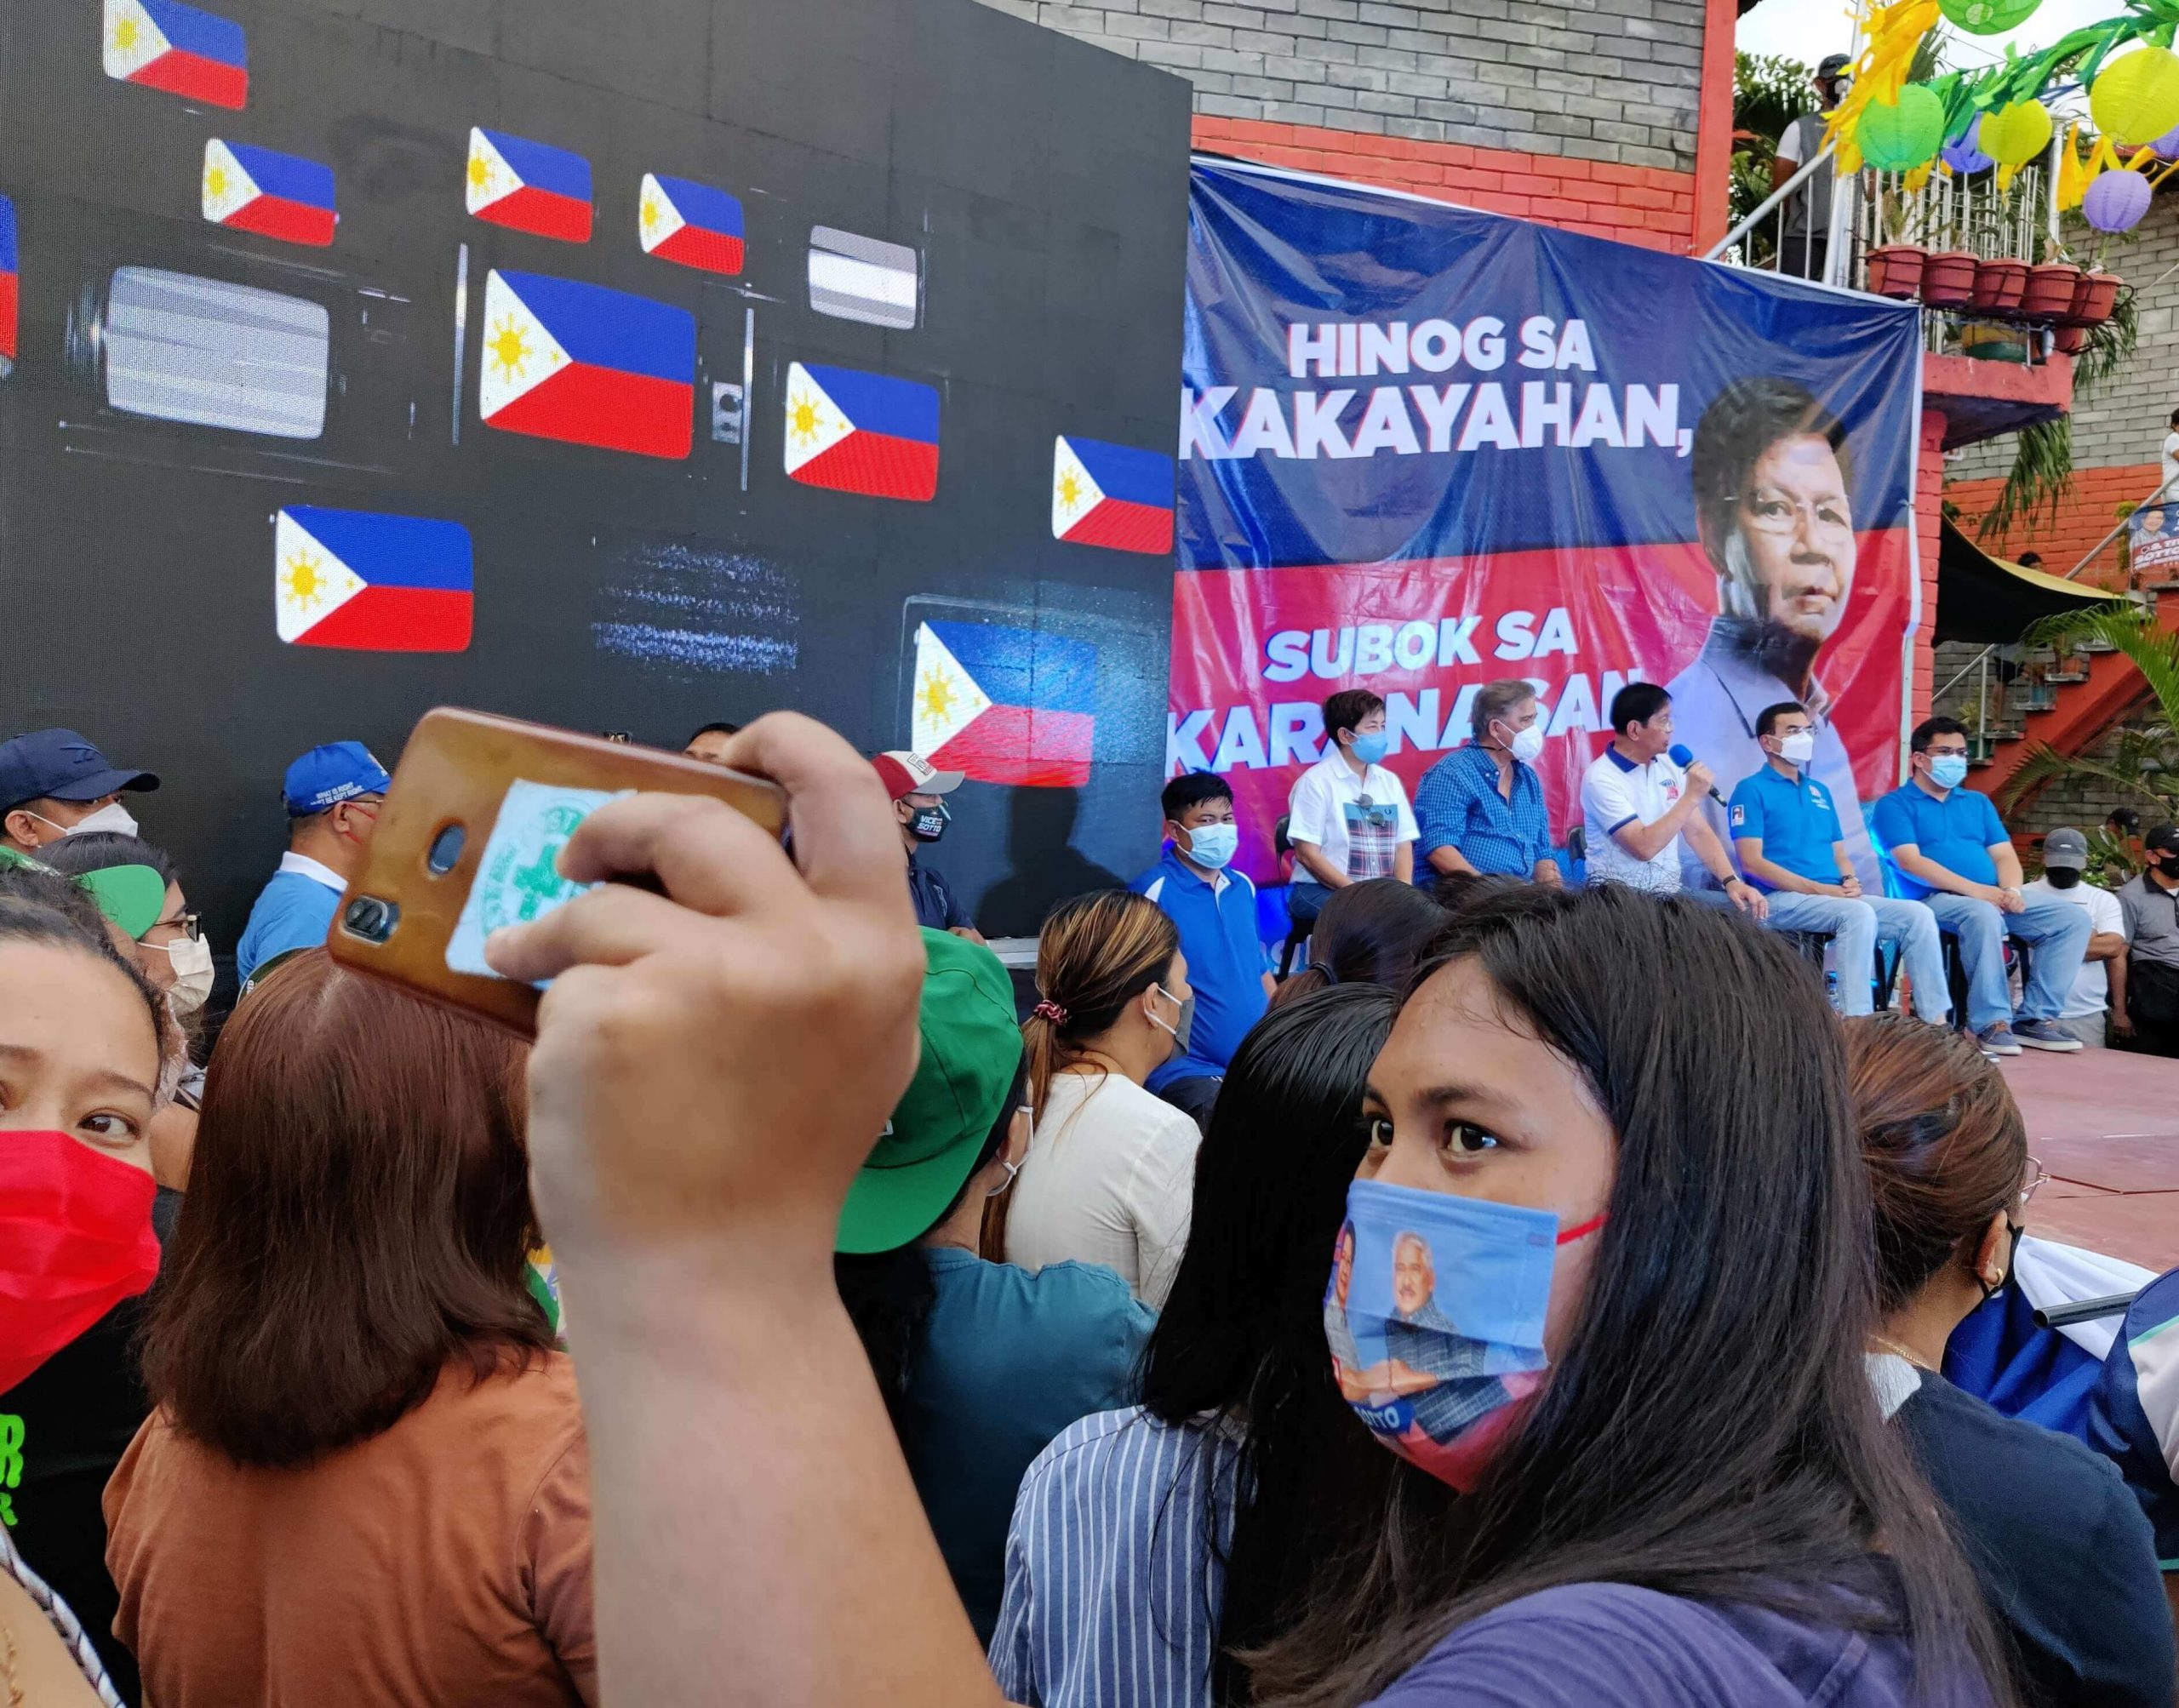 A woman raises her smartphone to take a selfie as the Lacson-Sotto tandem answers questions during the March 26 town hall meeting at Brgy. 165, Malibay, Pasay City. Photo by Enrico Berdos/VERA Files